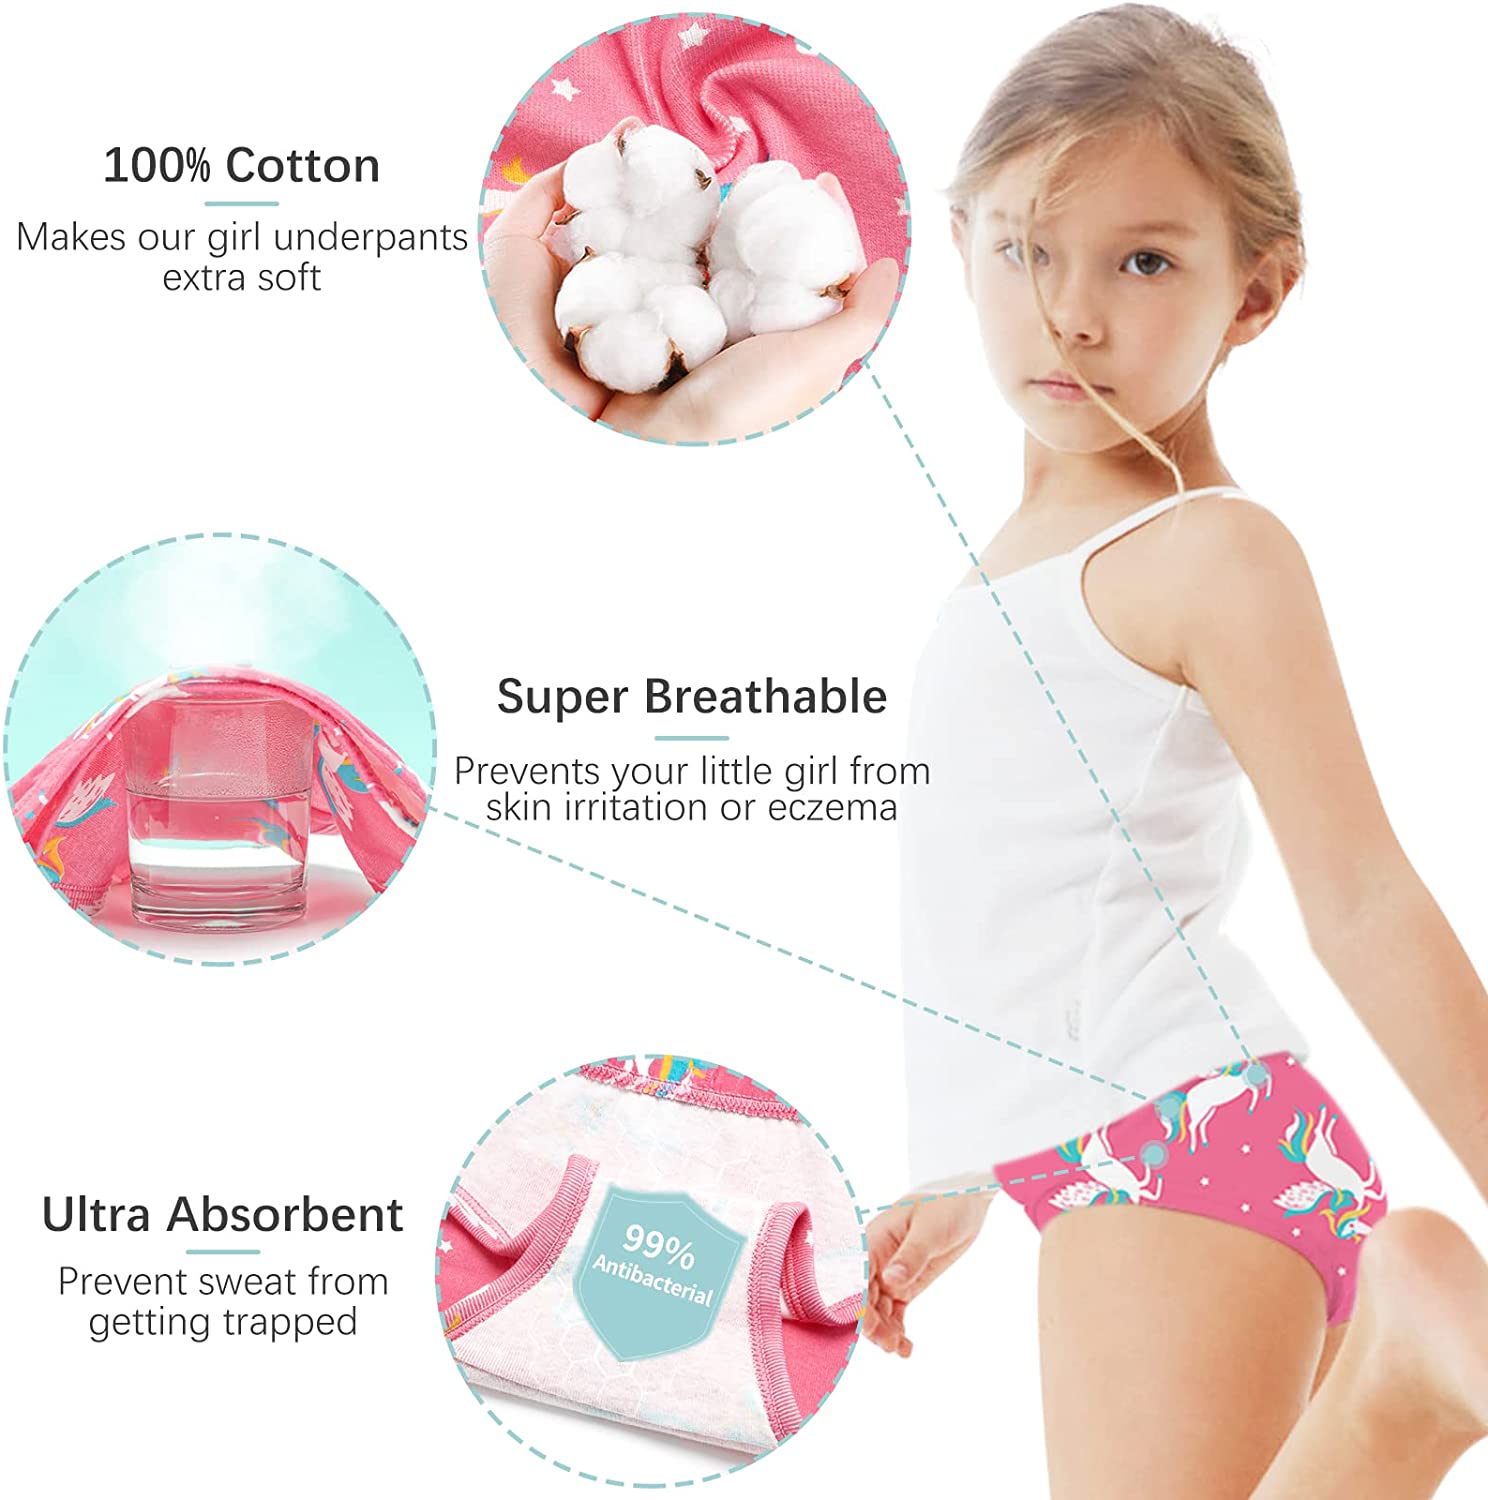 1-6 YEARS/ SIX-PACK OF TEXTURED UNDERWEAR - Multicolored